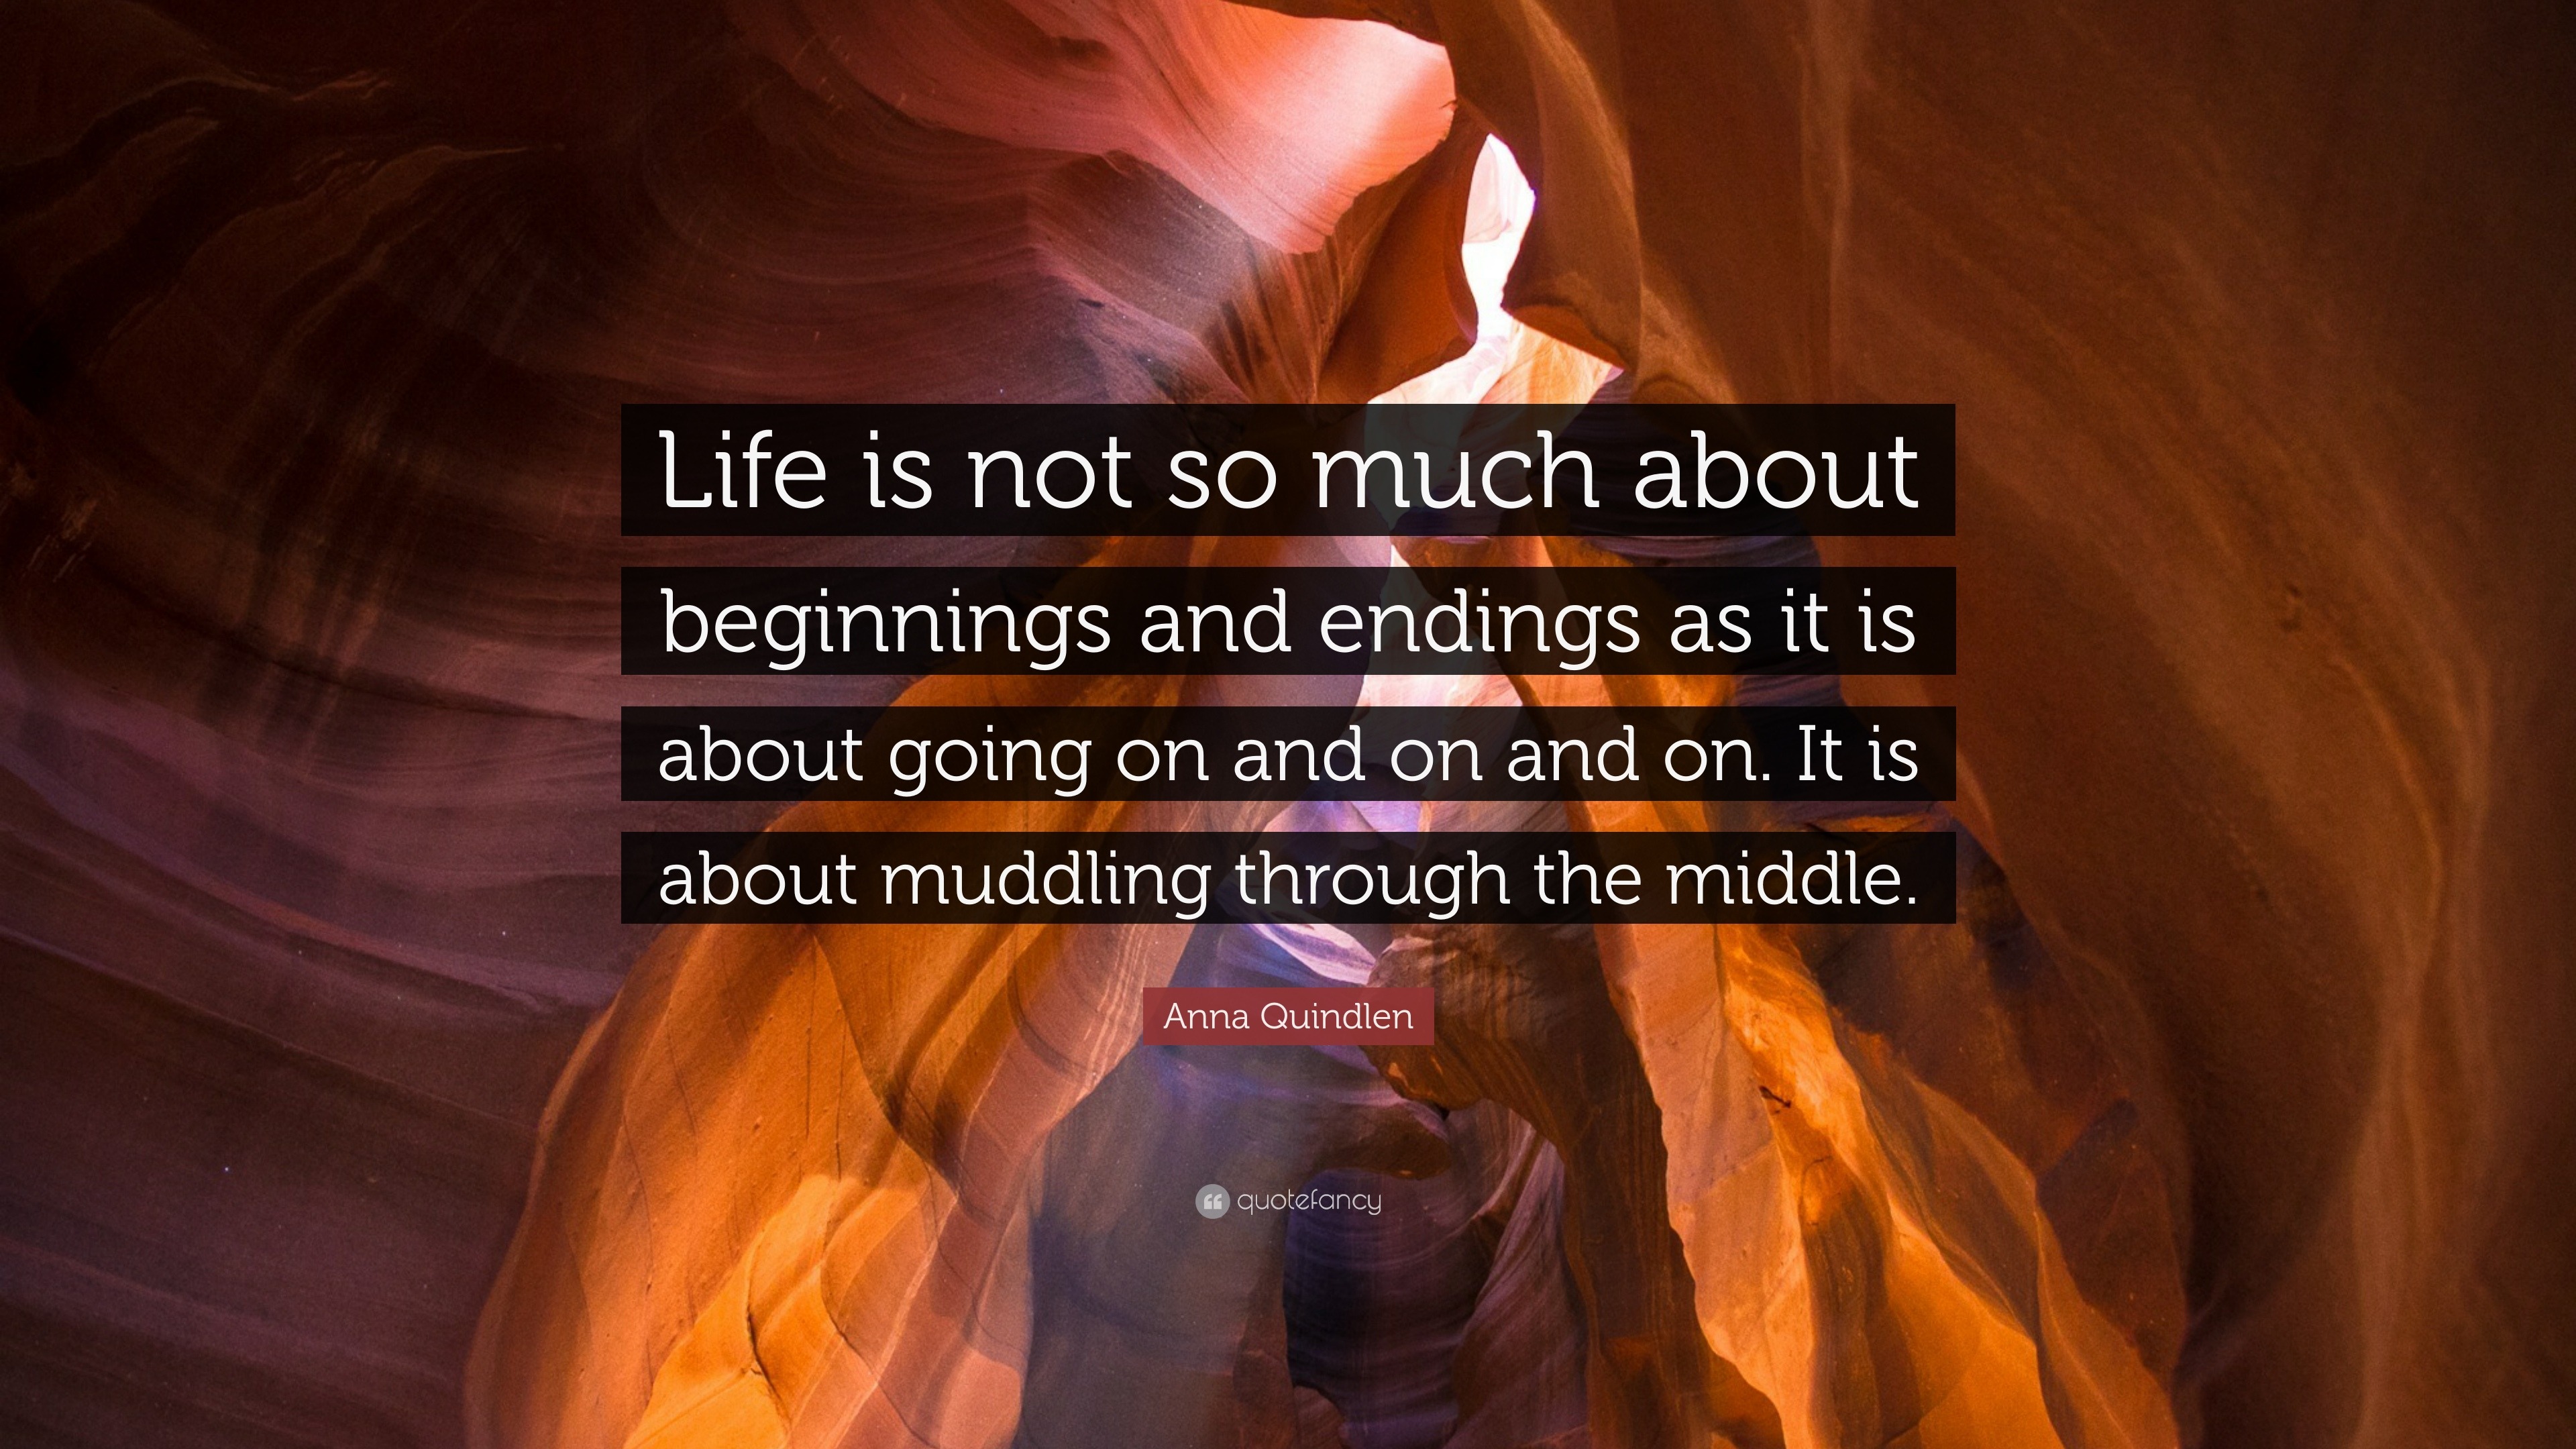 Anna Quindlen Quote: “Life is not so much about beginnings and endings ...